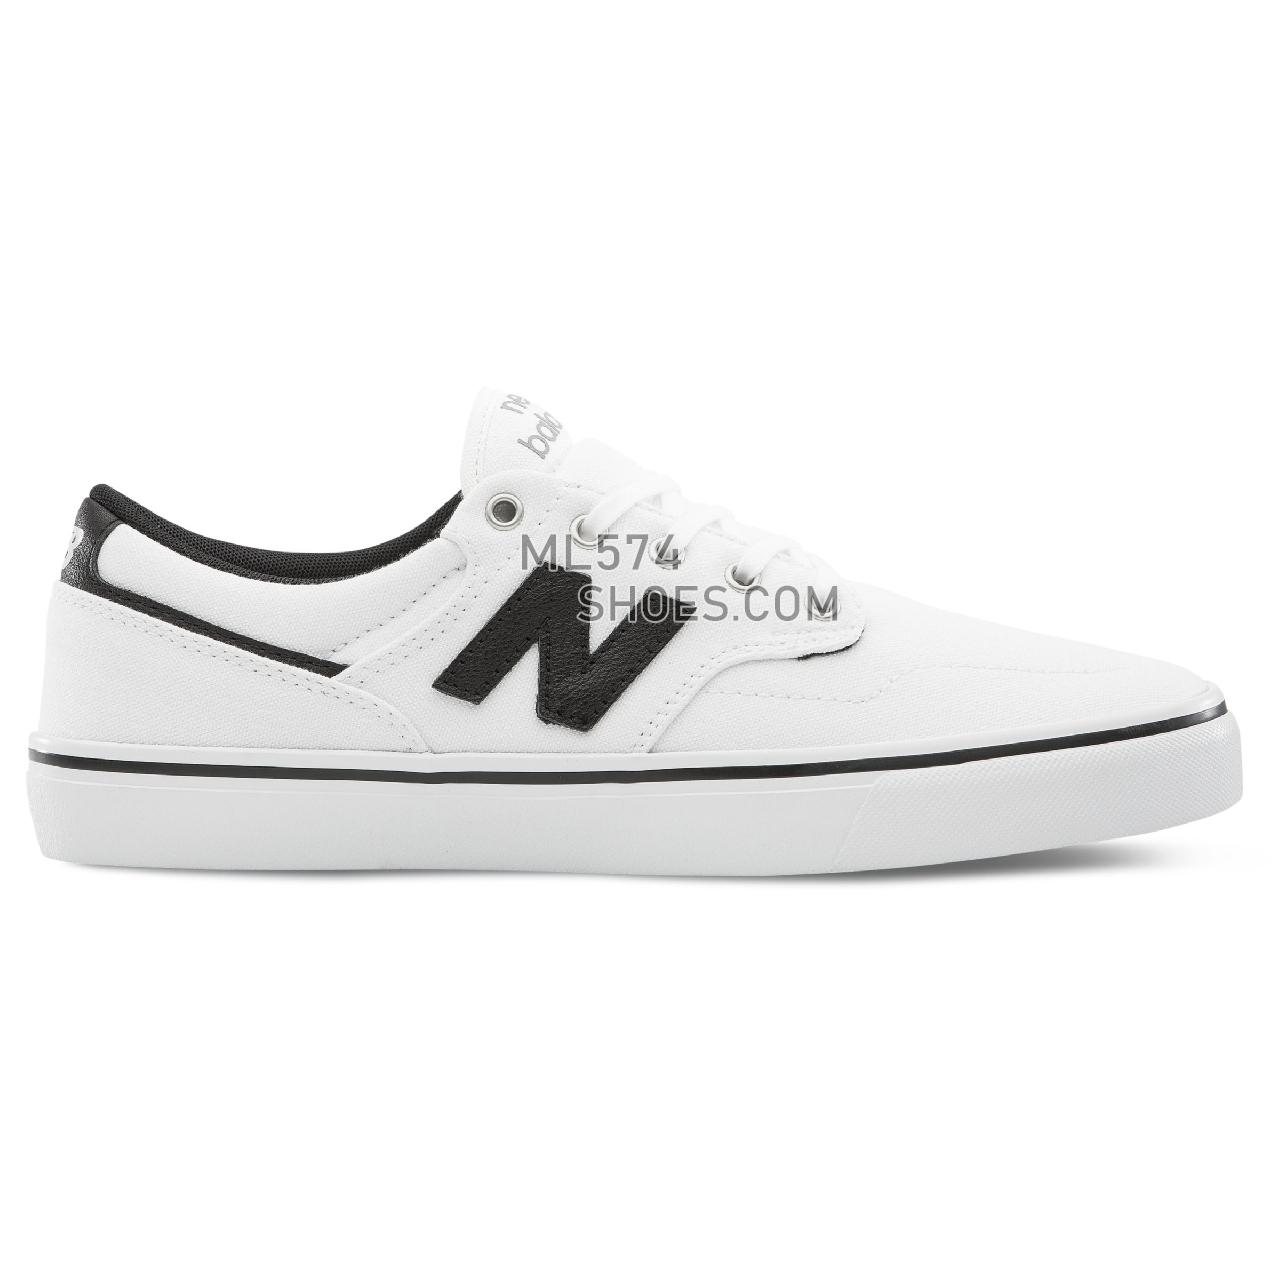 New Balance 331 - Men's 331 - Classic White with Black - AM331WWG